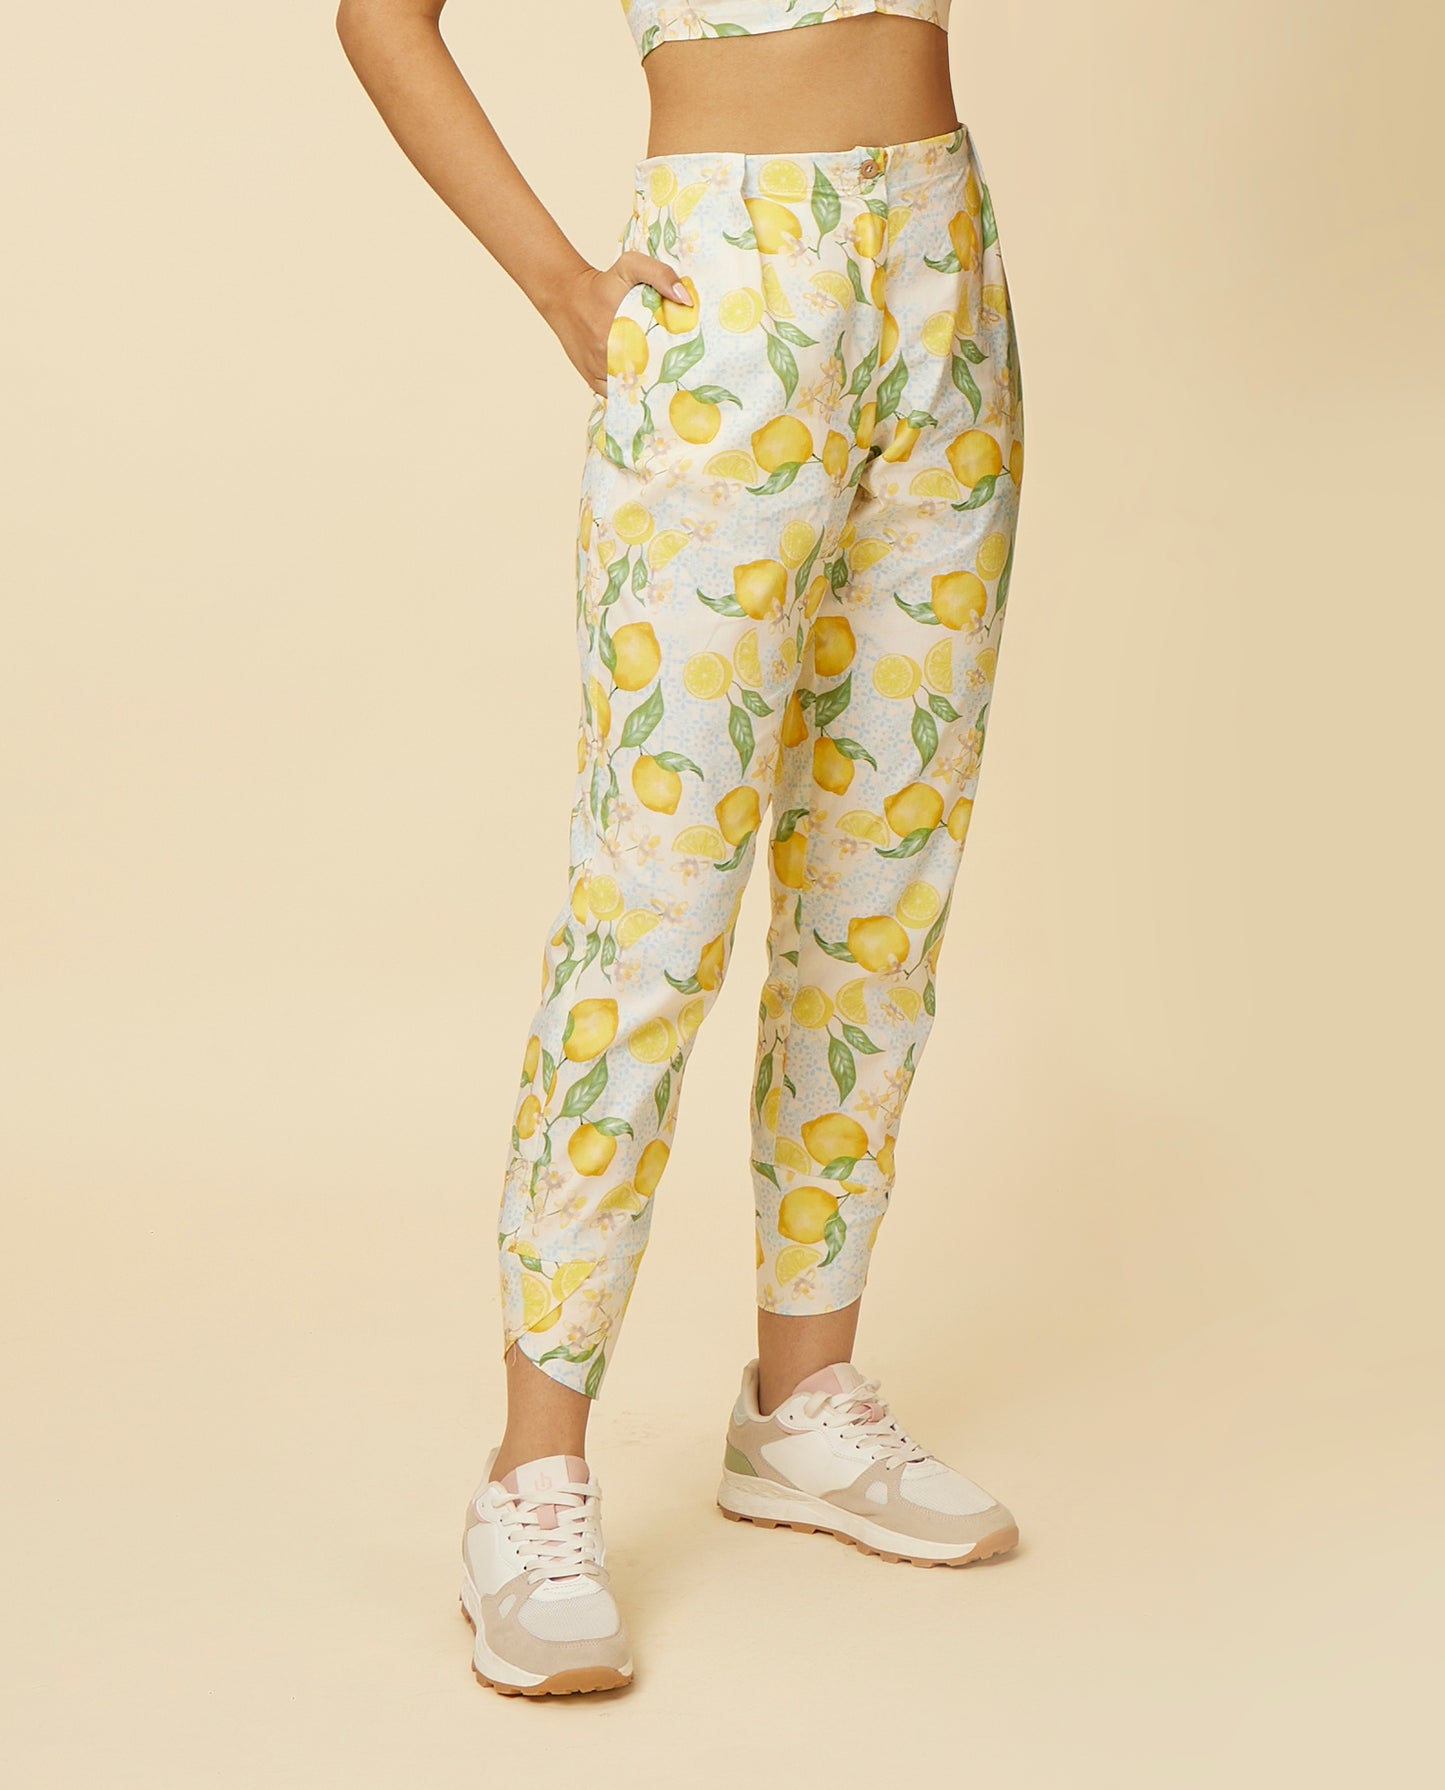 Detailed view of Citrus Dream Pants showcasing the zesty lemon tile print on a white base, focusing on the stylish tulip hem and the fit that offers a contemporary edge and a burst of freshness to the attire.